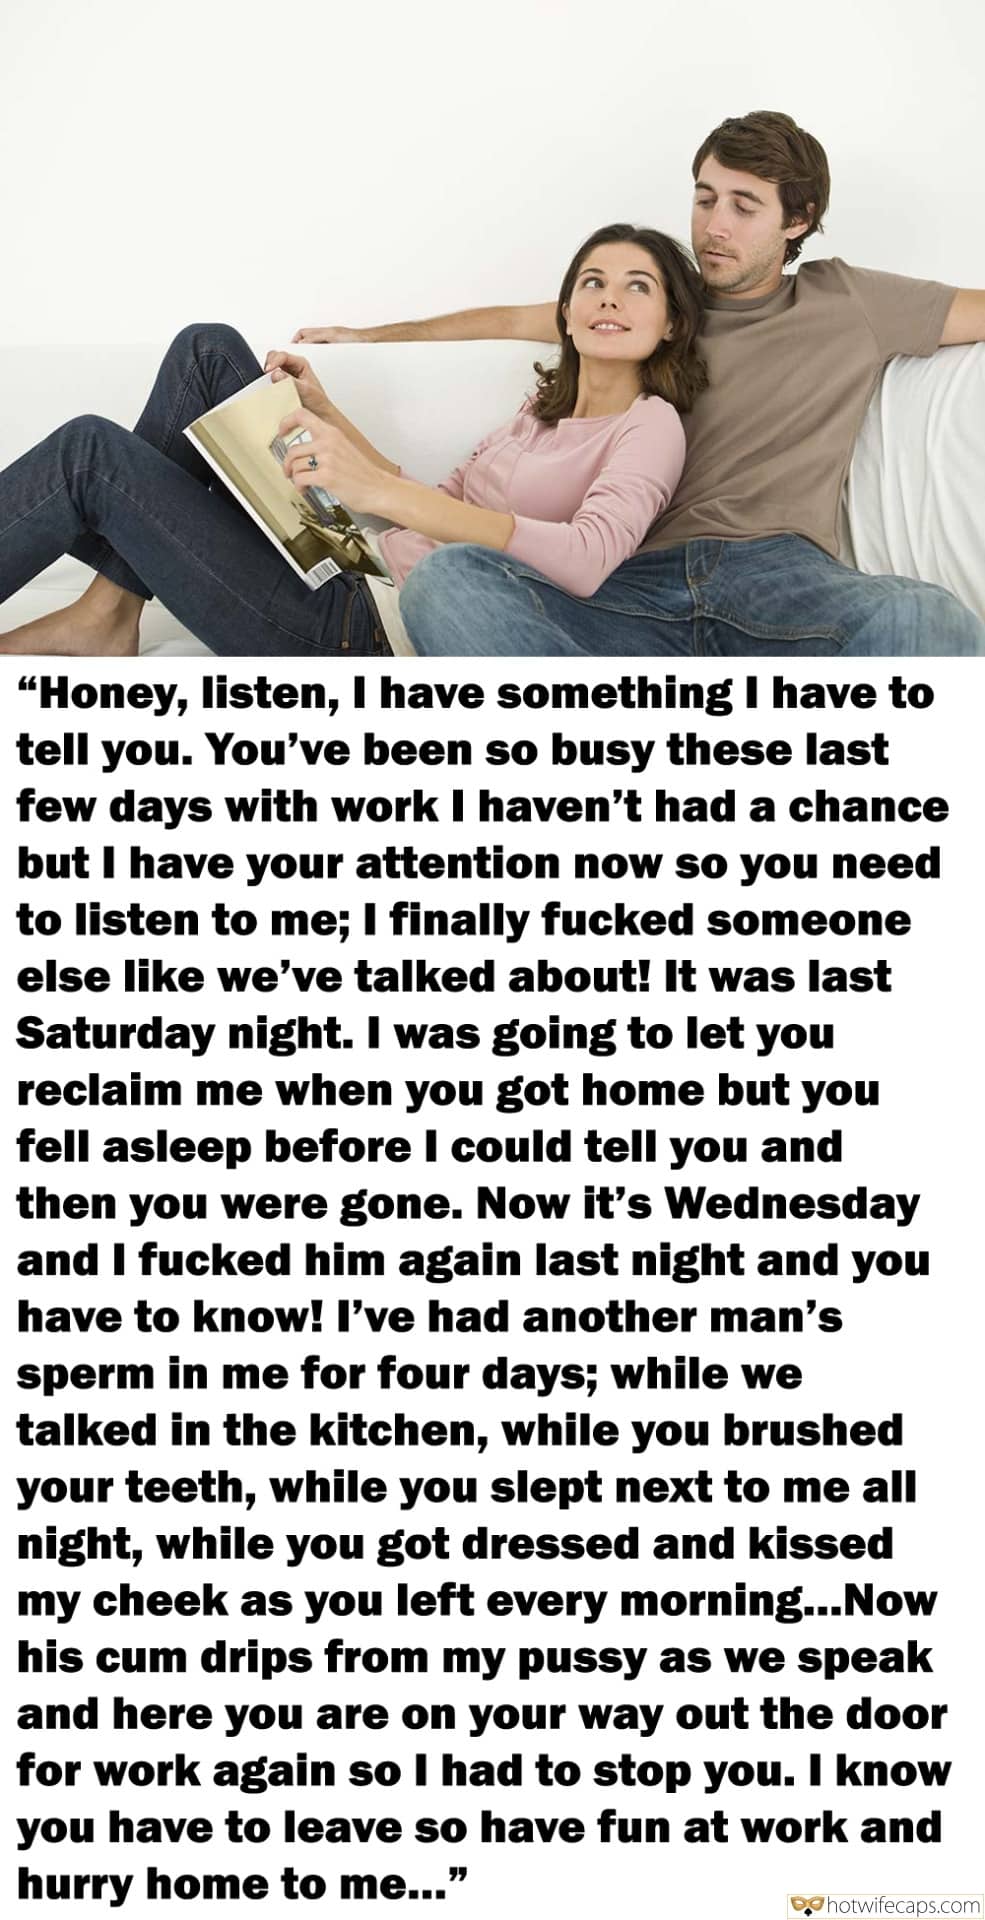 Sexy Memes Cuckold Stories  hotwife caption: “Honey, listen, I have something I have to tell you. You’ve been so busy these last few days with work I haven’t had a chance but I have your attention now so you need to listen to me; I finally...